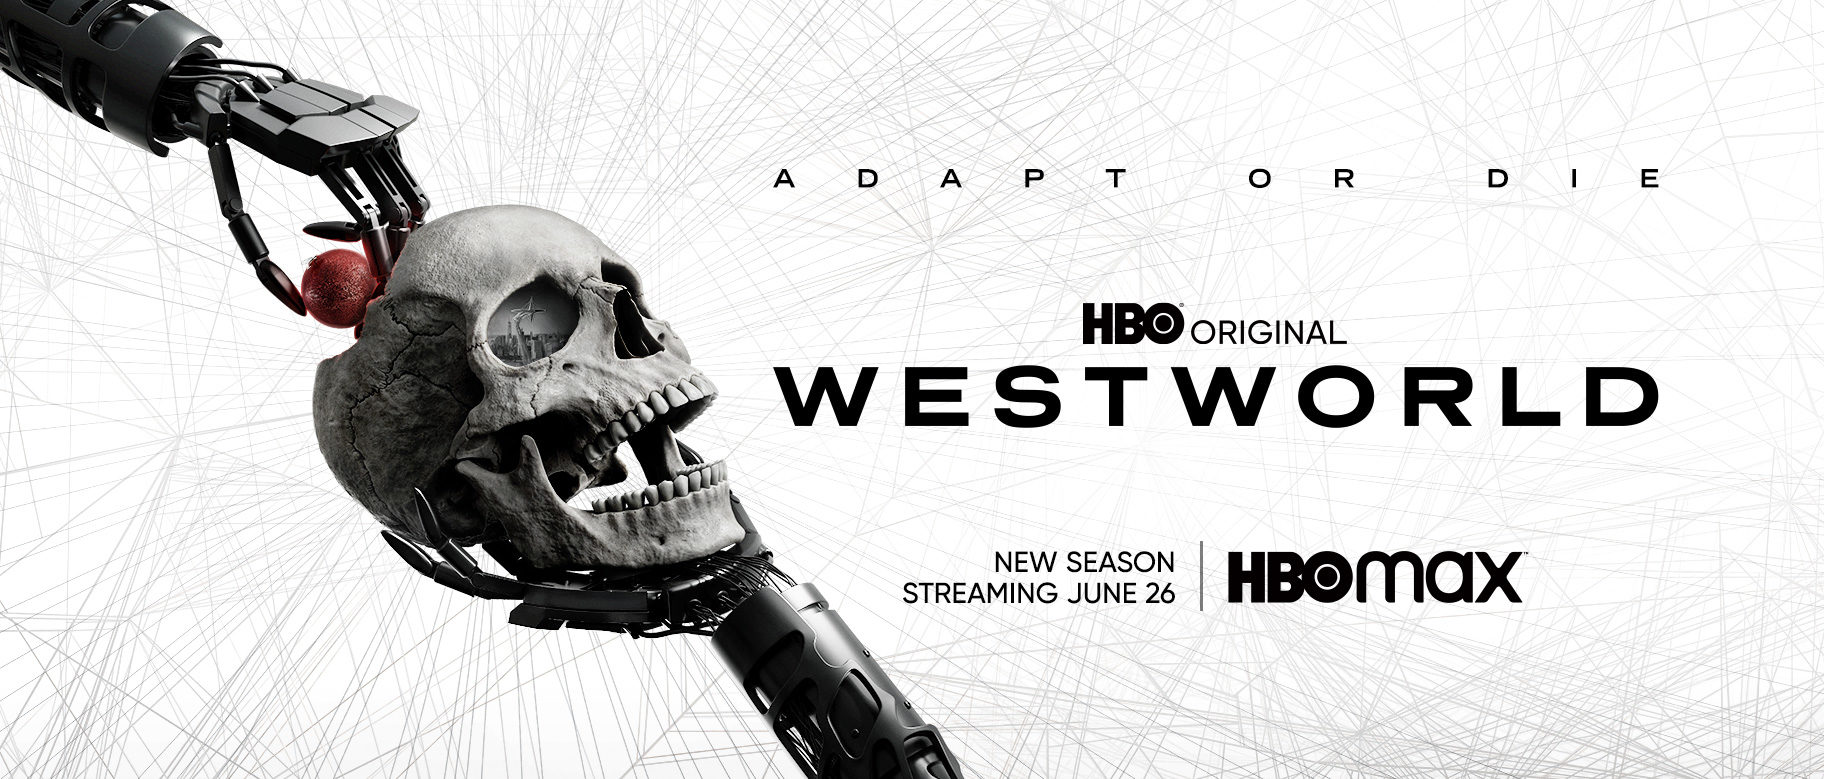 Westworld Season 4: HBO Max 2022 Trailer Offers Series Return Preview